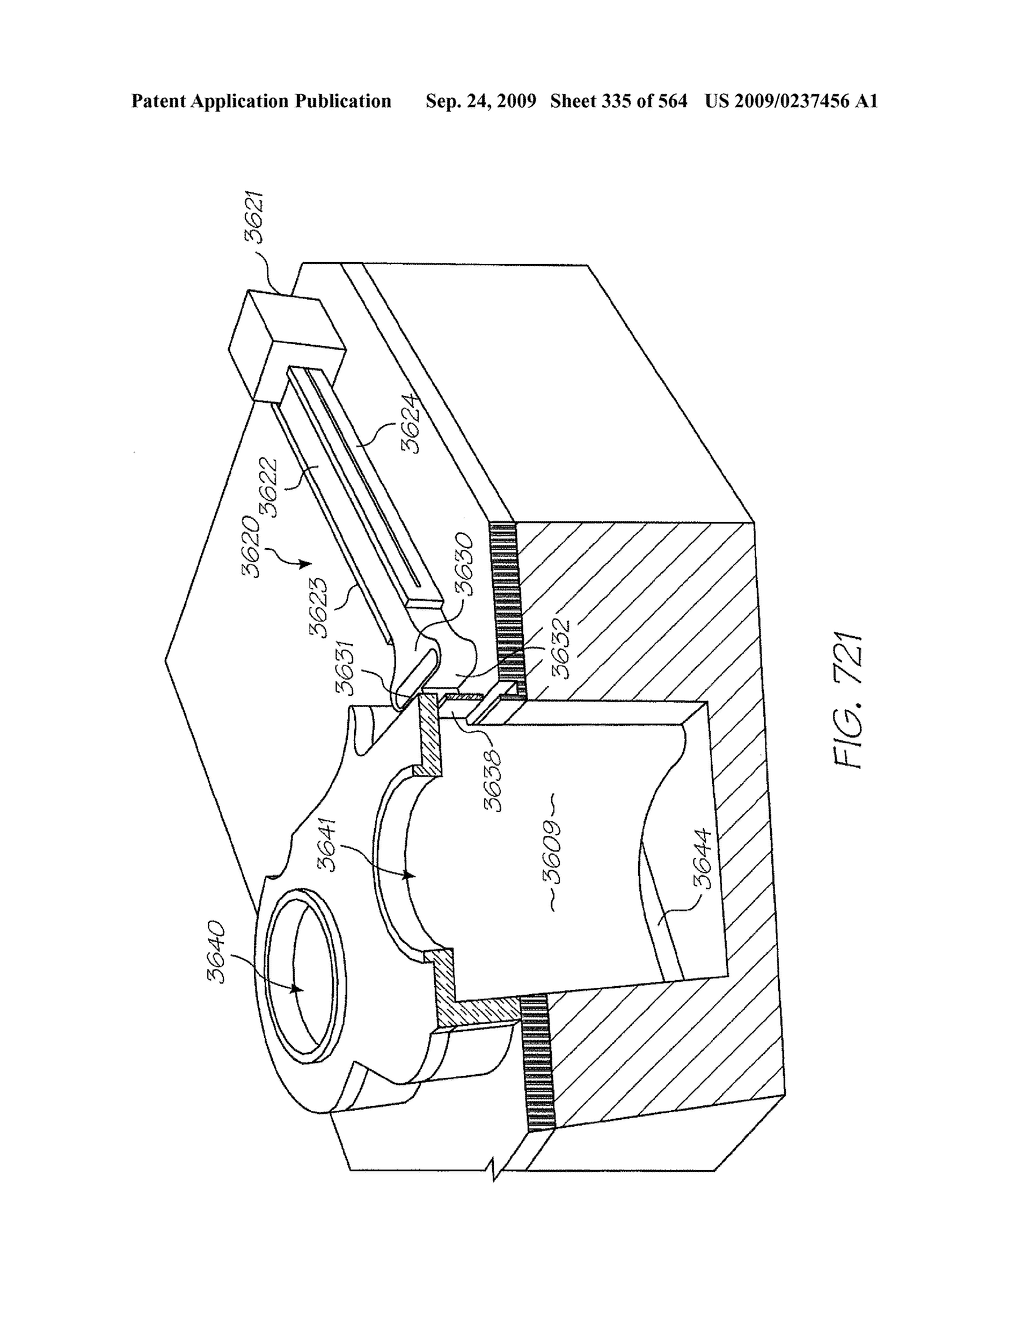 Inkjet Printhead With Paddle For Ejecting Ink From One Of Two Nozzles - diagram, schematic, and image 336